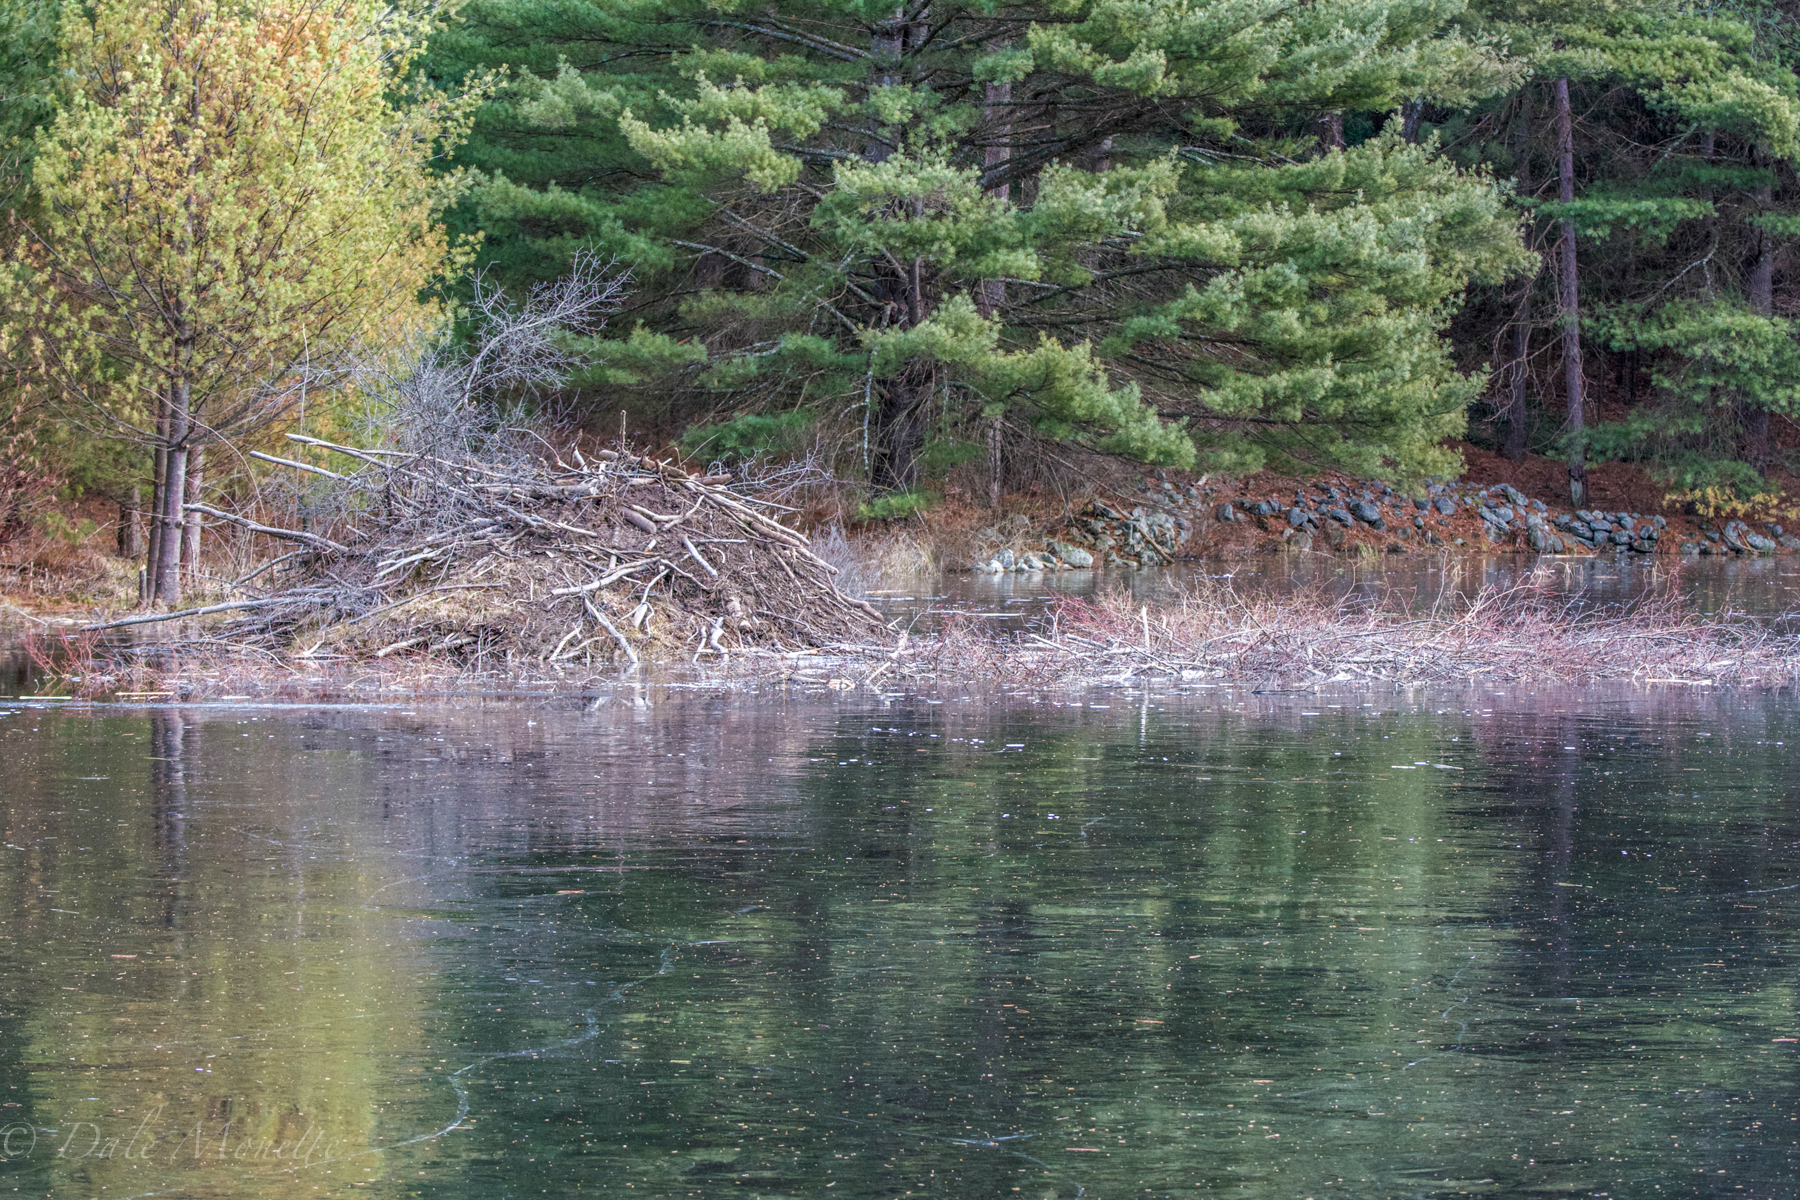 These beavers have a great twig cache built up for food through the winter.